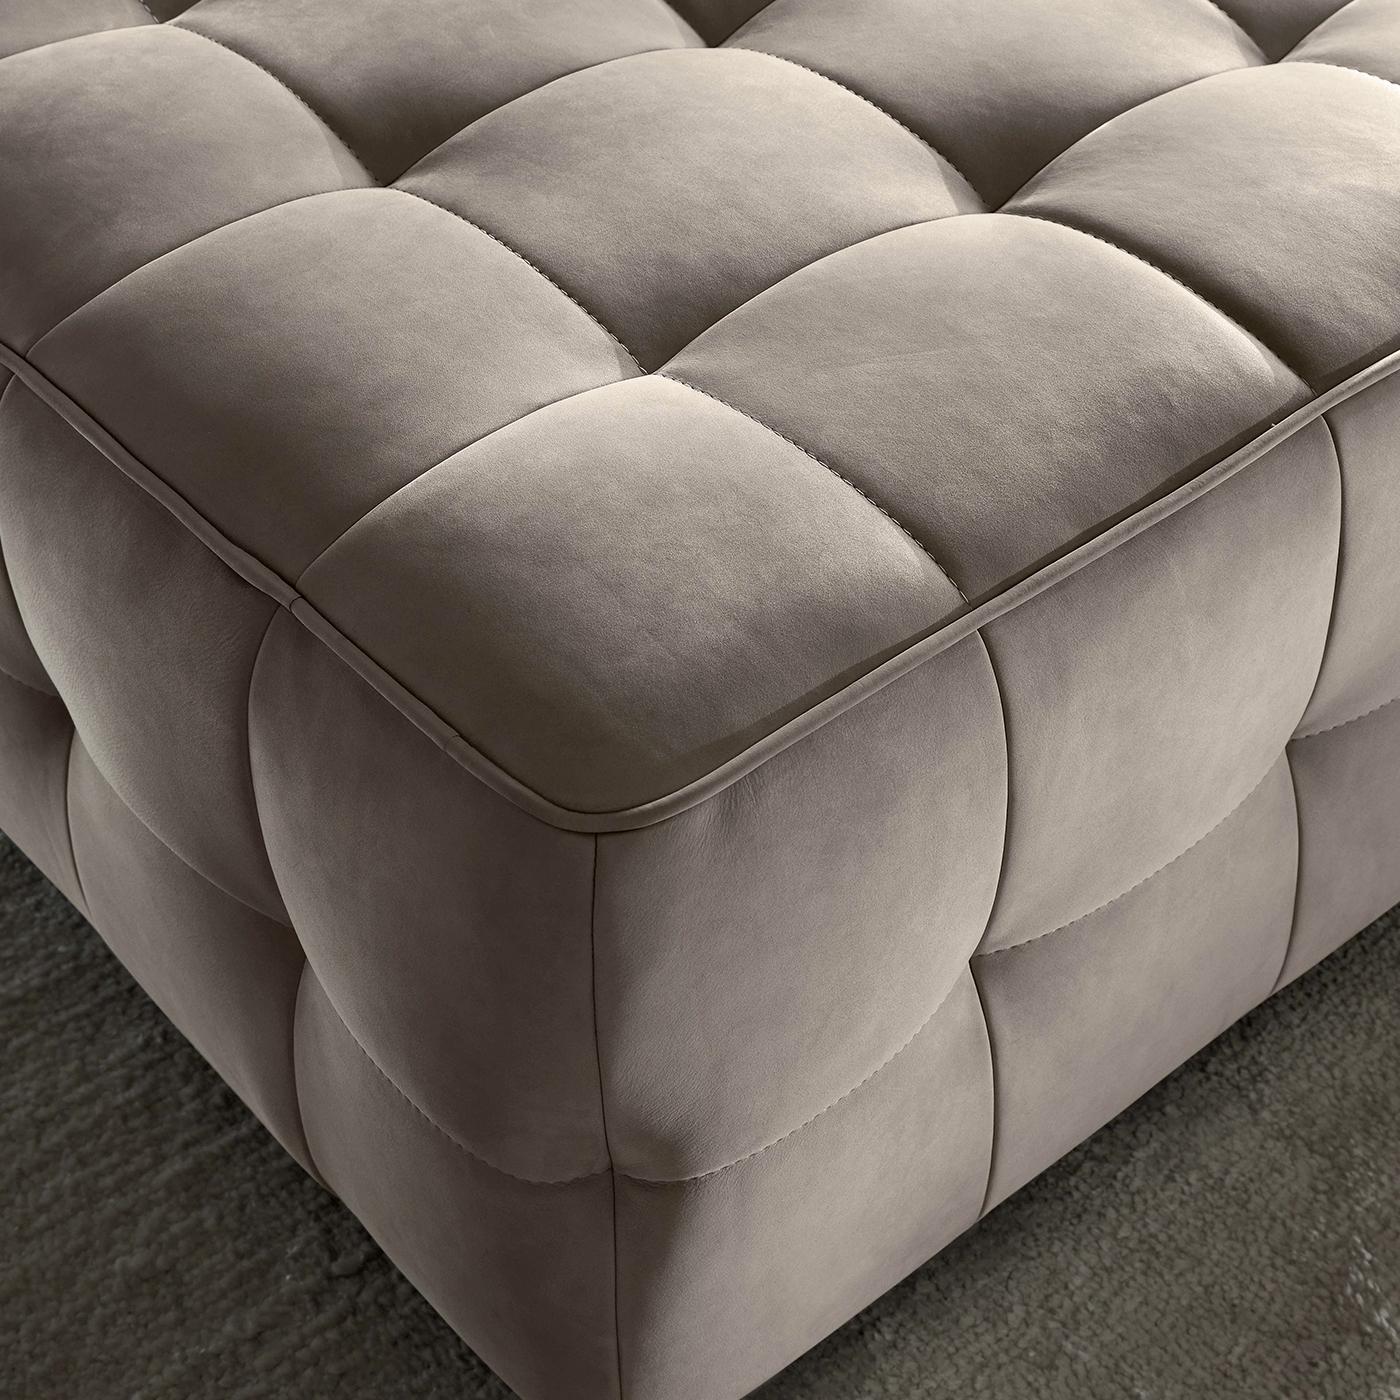 The perfect complement to the bold sofa, this pouf ottoman will take centre stage in any room with its Classic detailing that never goes out of style. Designed by Marzia and Leo Dainelli, this piece is handcrafted of a rectangular wood frame with